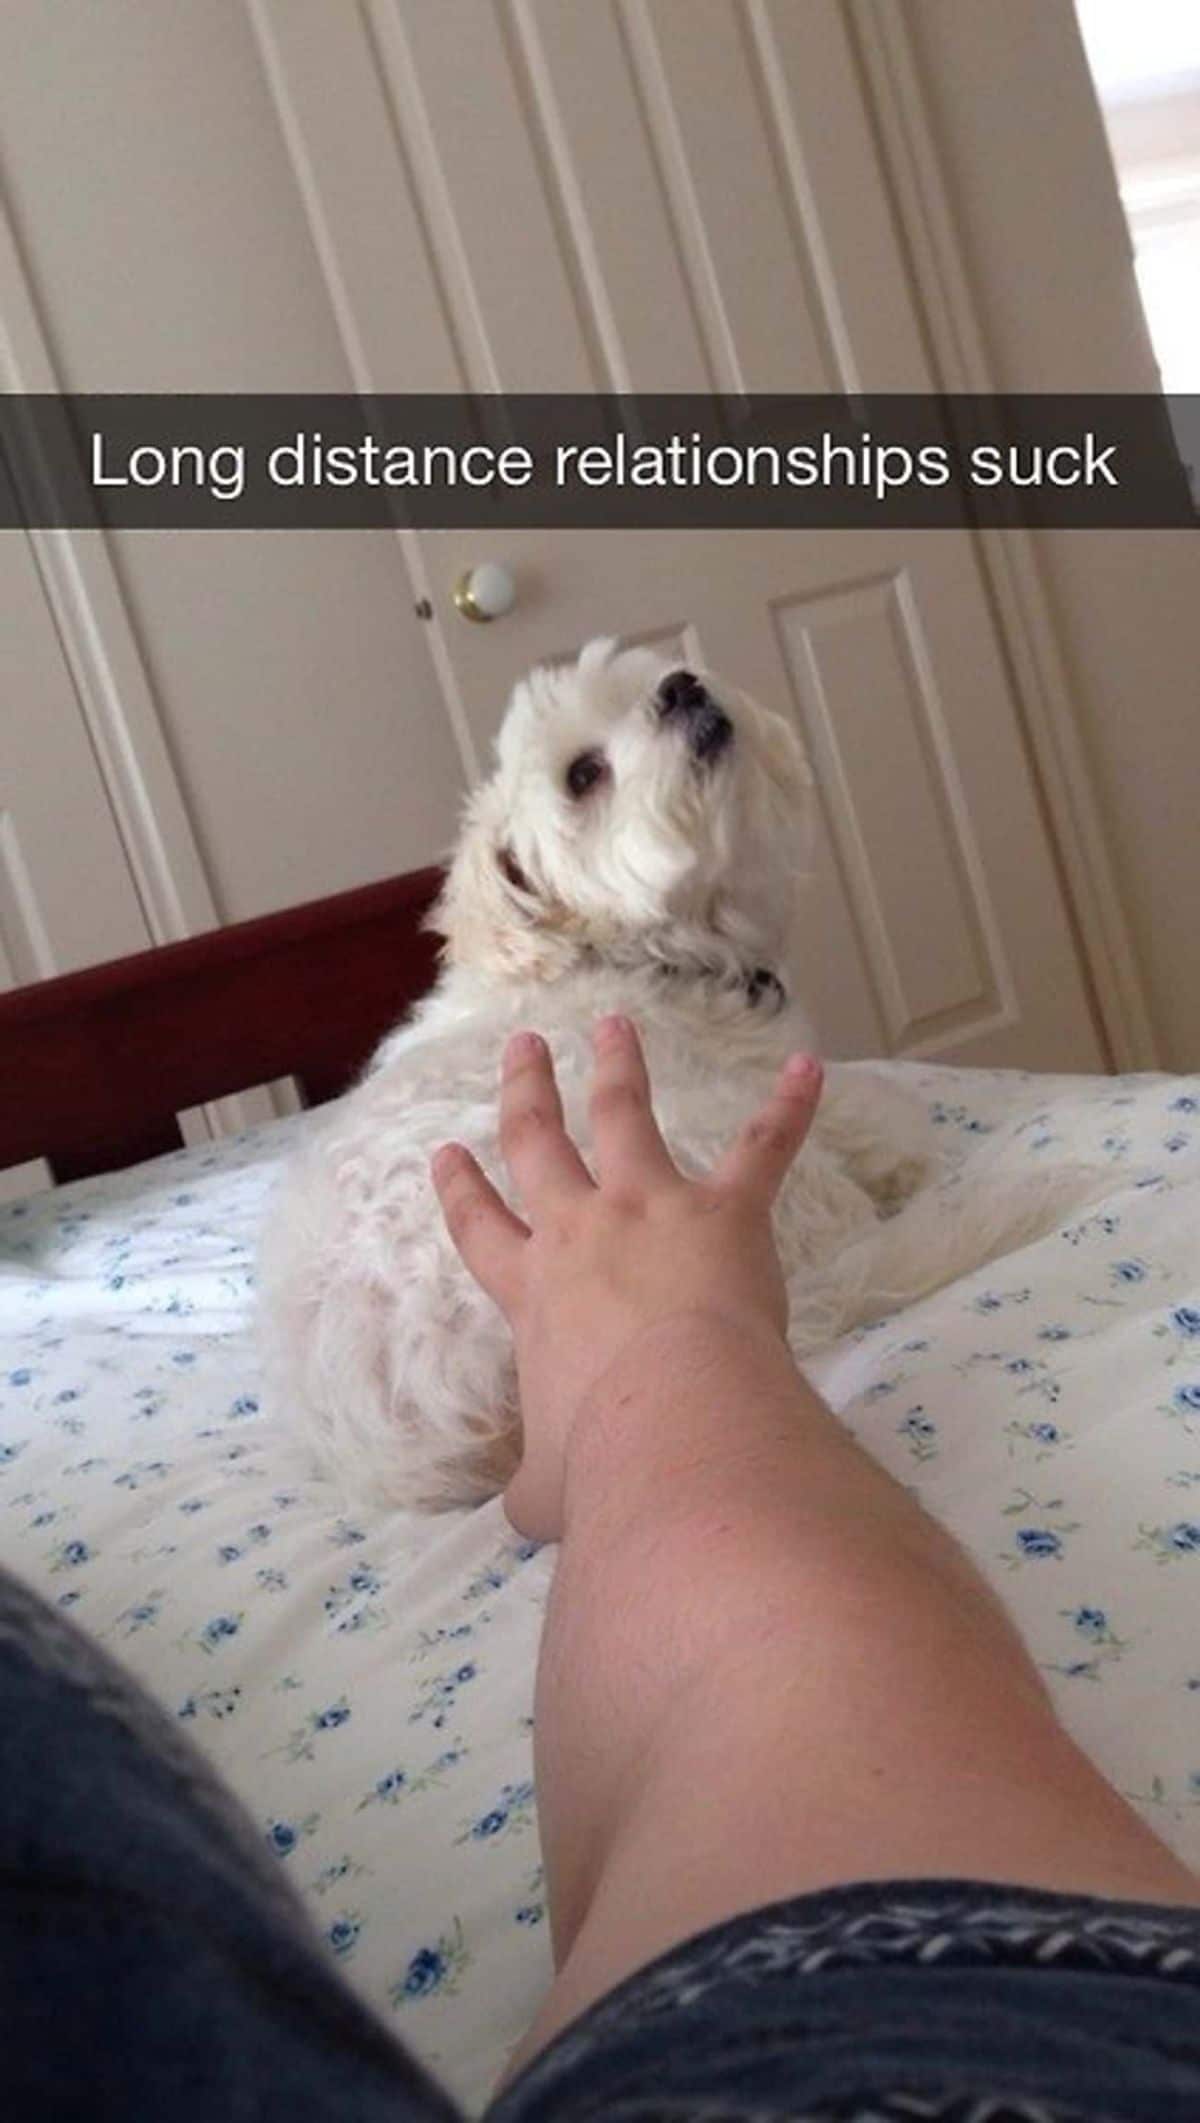 small fluffy dog on a white bed with someone reaching a hand to the dog with the caption Long distance relationships